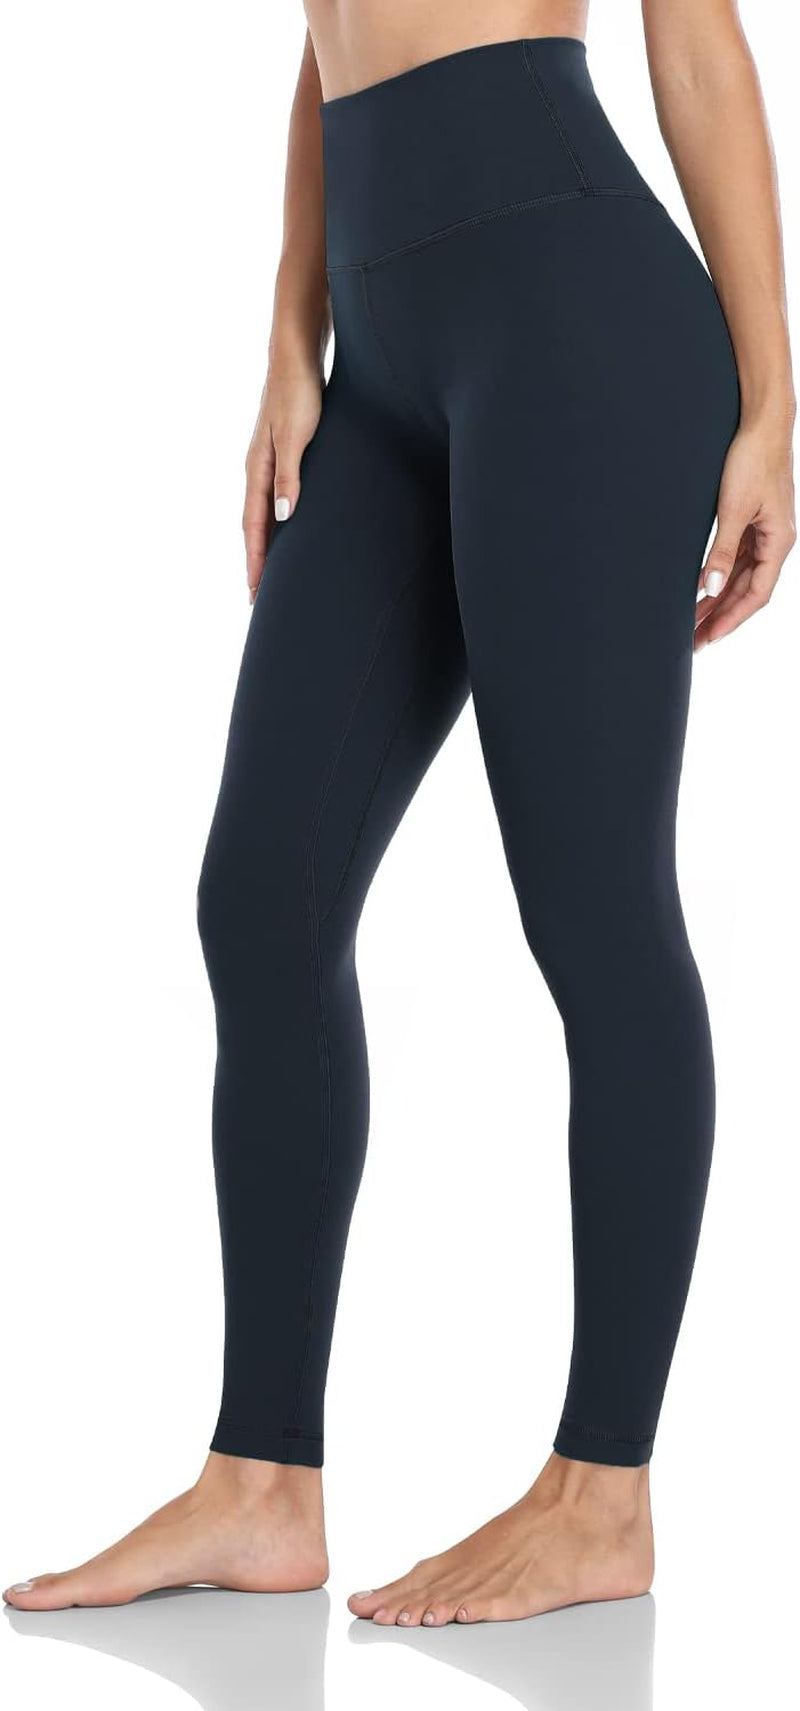 Essential/Workout Pro/Yoga Pro Full Length Yoga Leggings, Women'S High Waisted Workout Compression Pants 28''